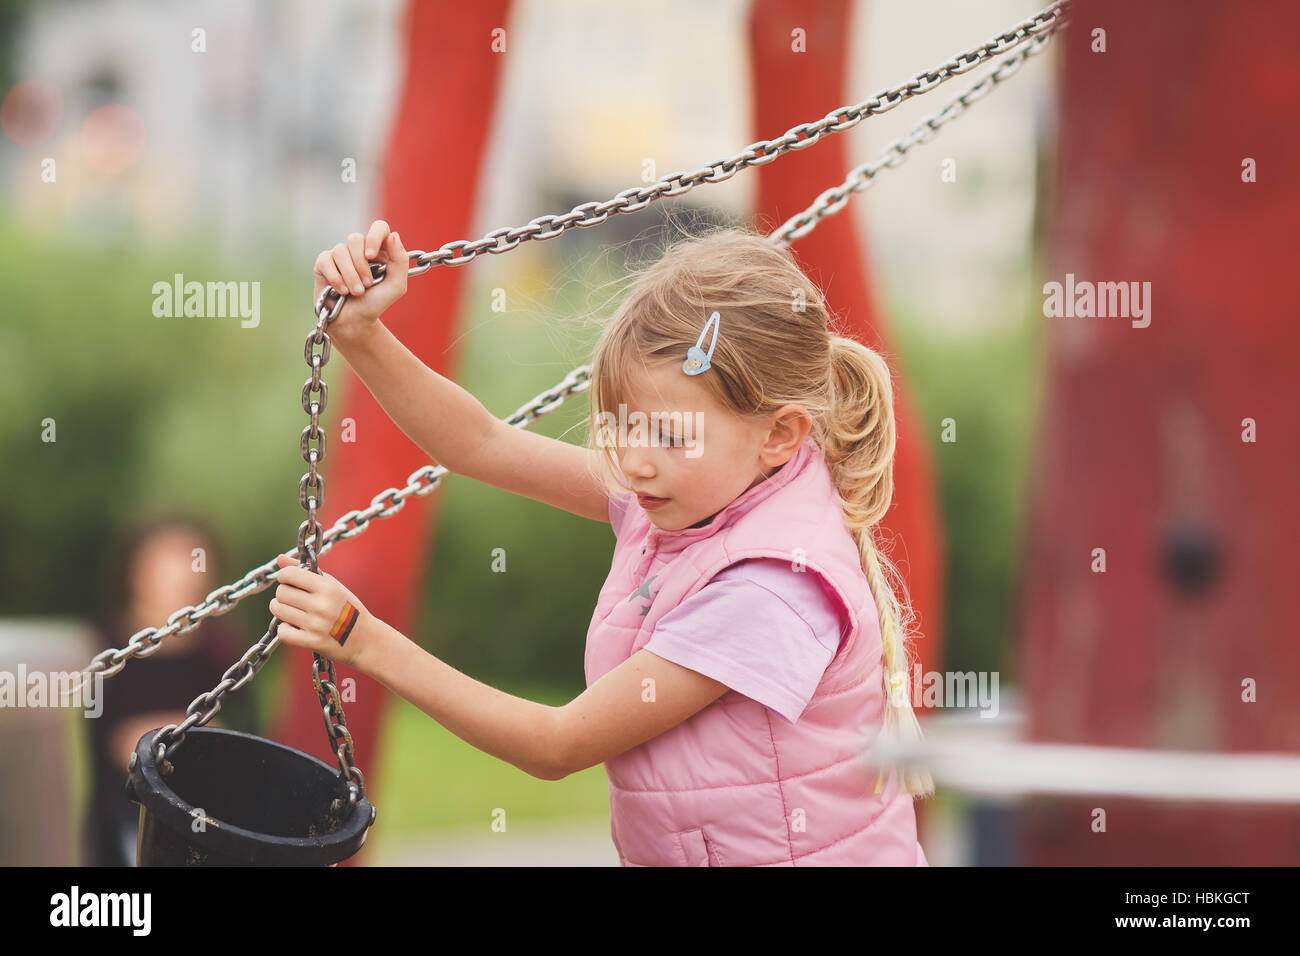 Young blond girl working on playground Stock Photo